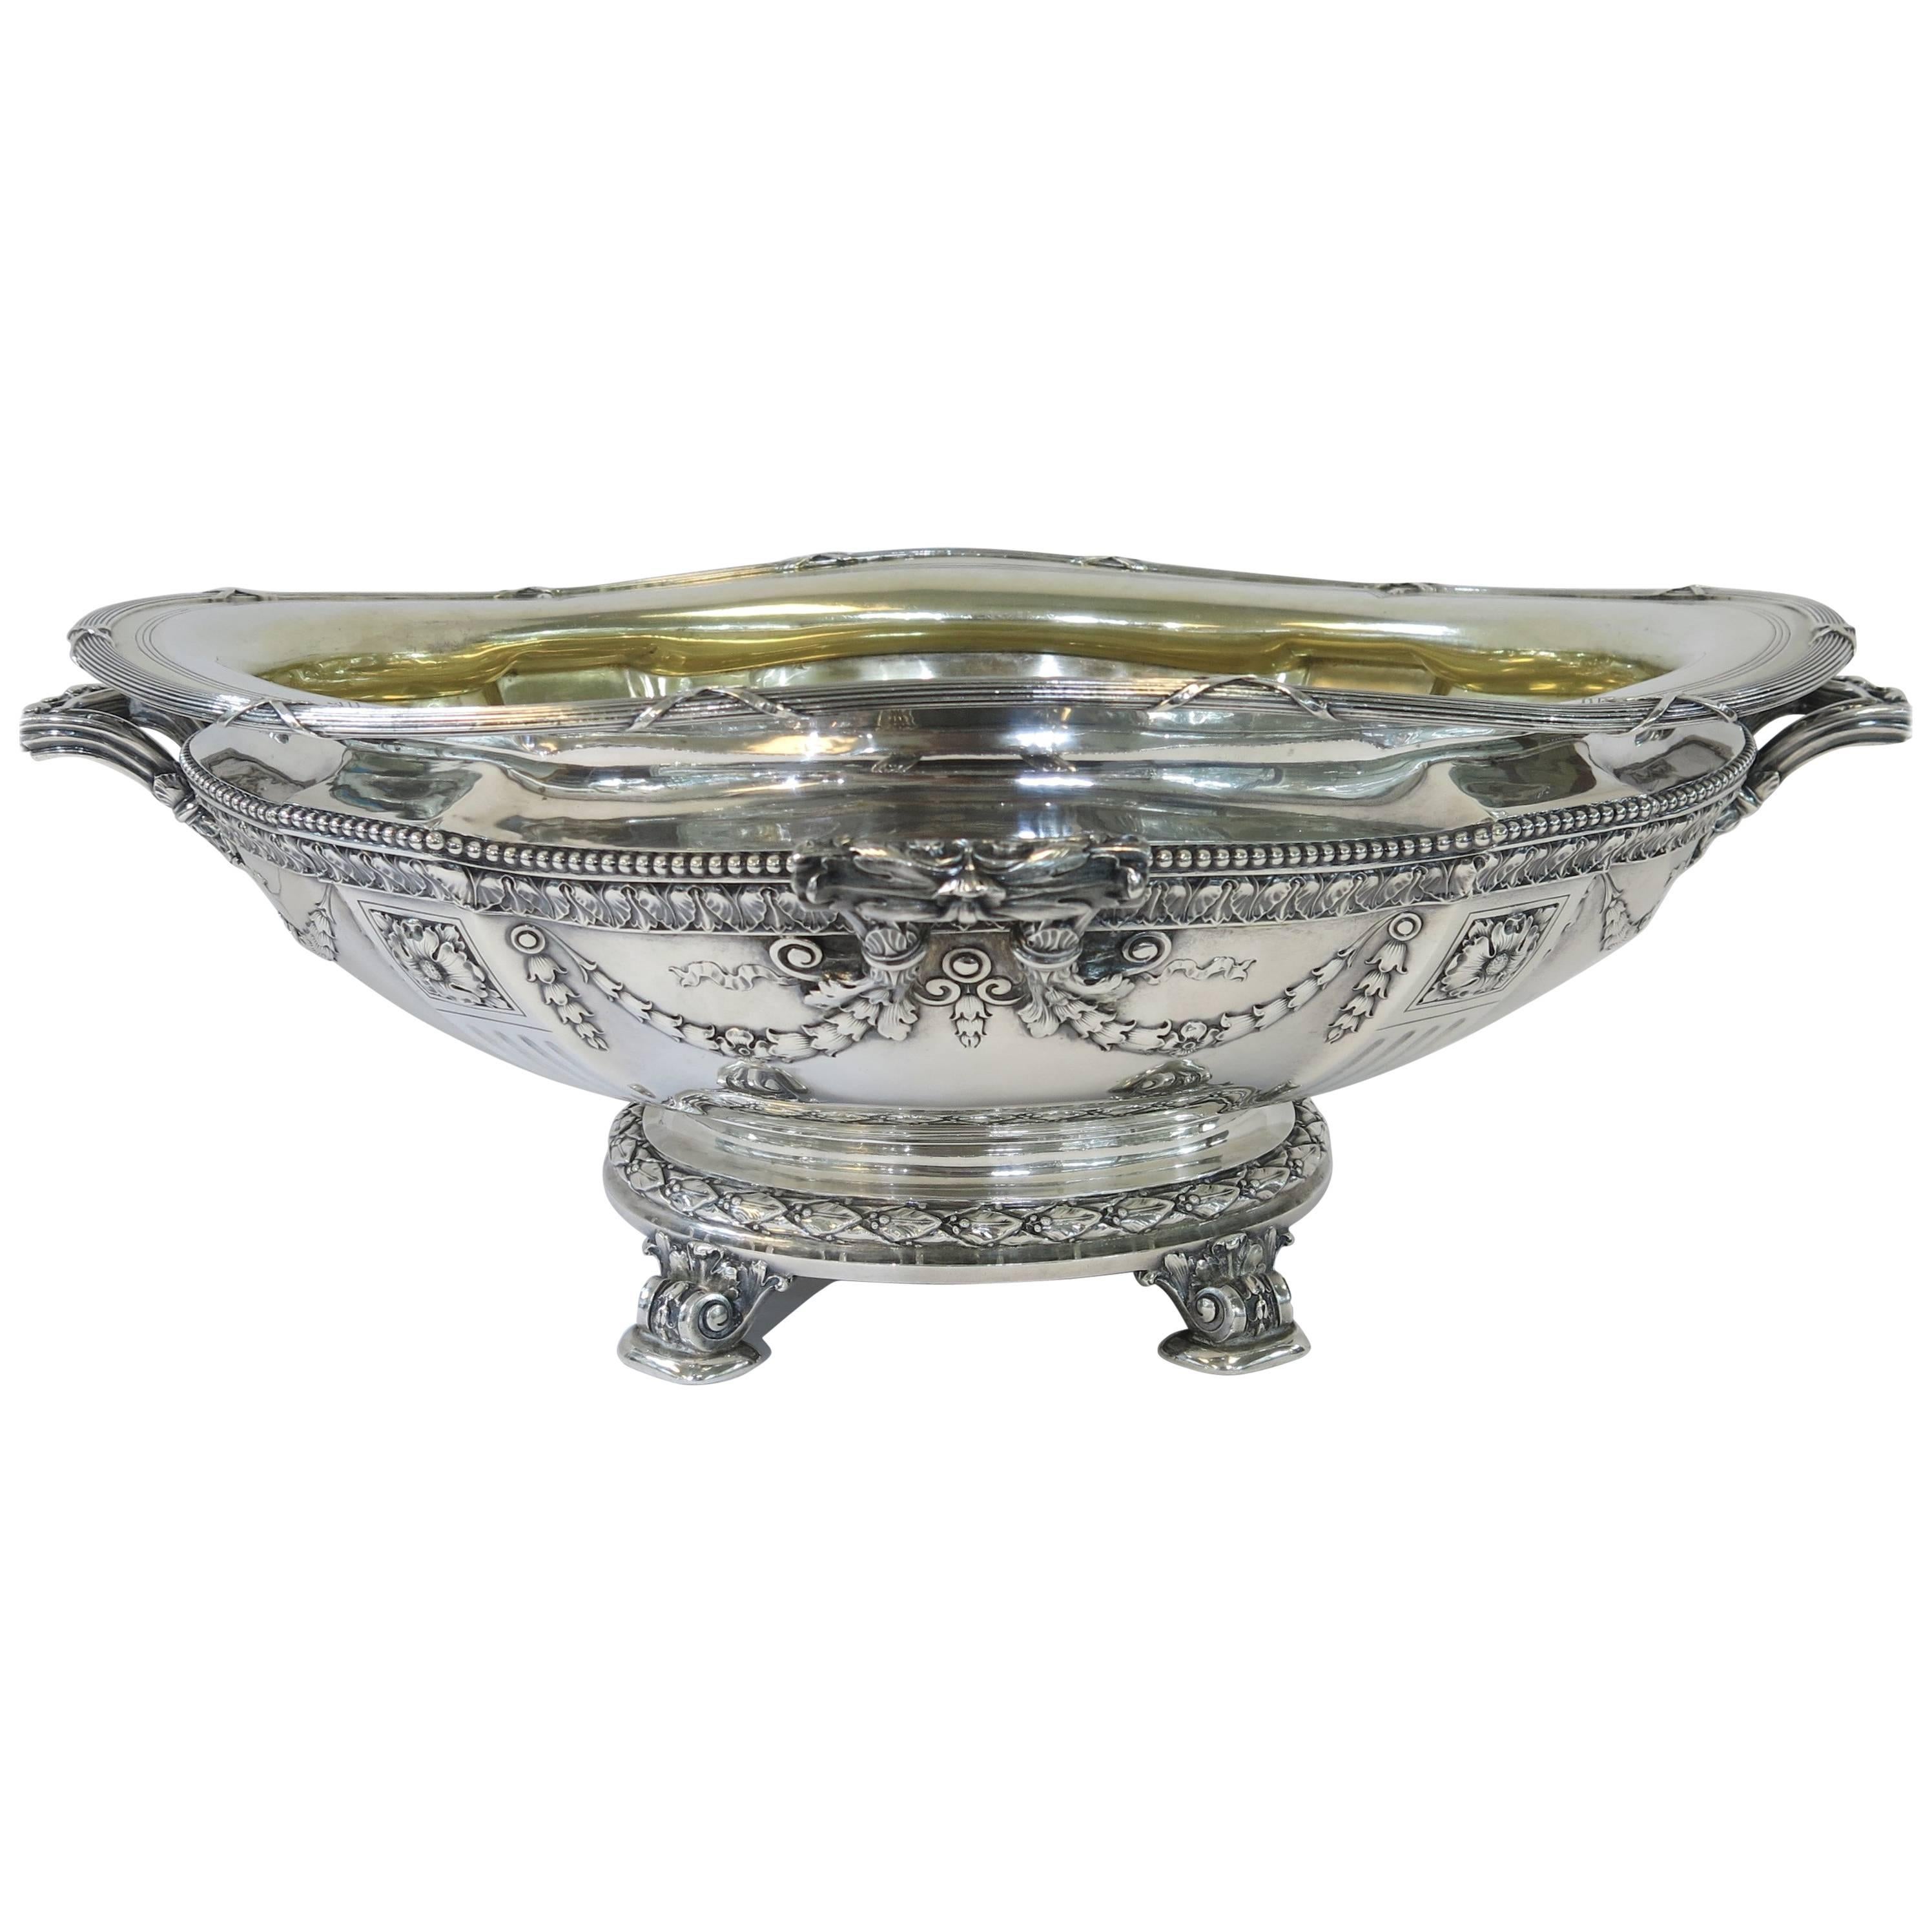 Large Oval Antique Sterling Silver Centrepiece by Gorham